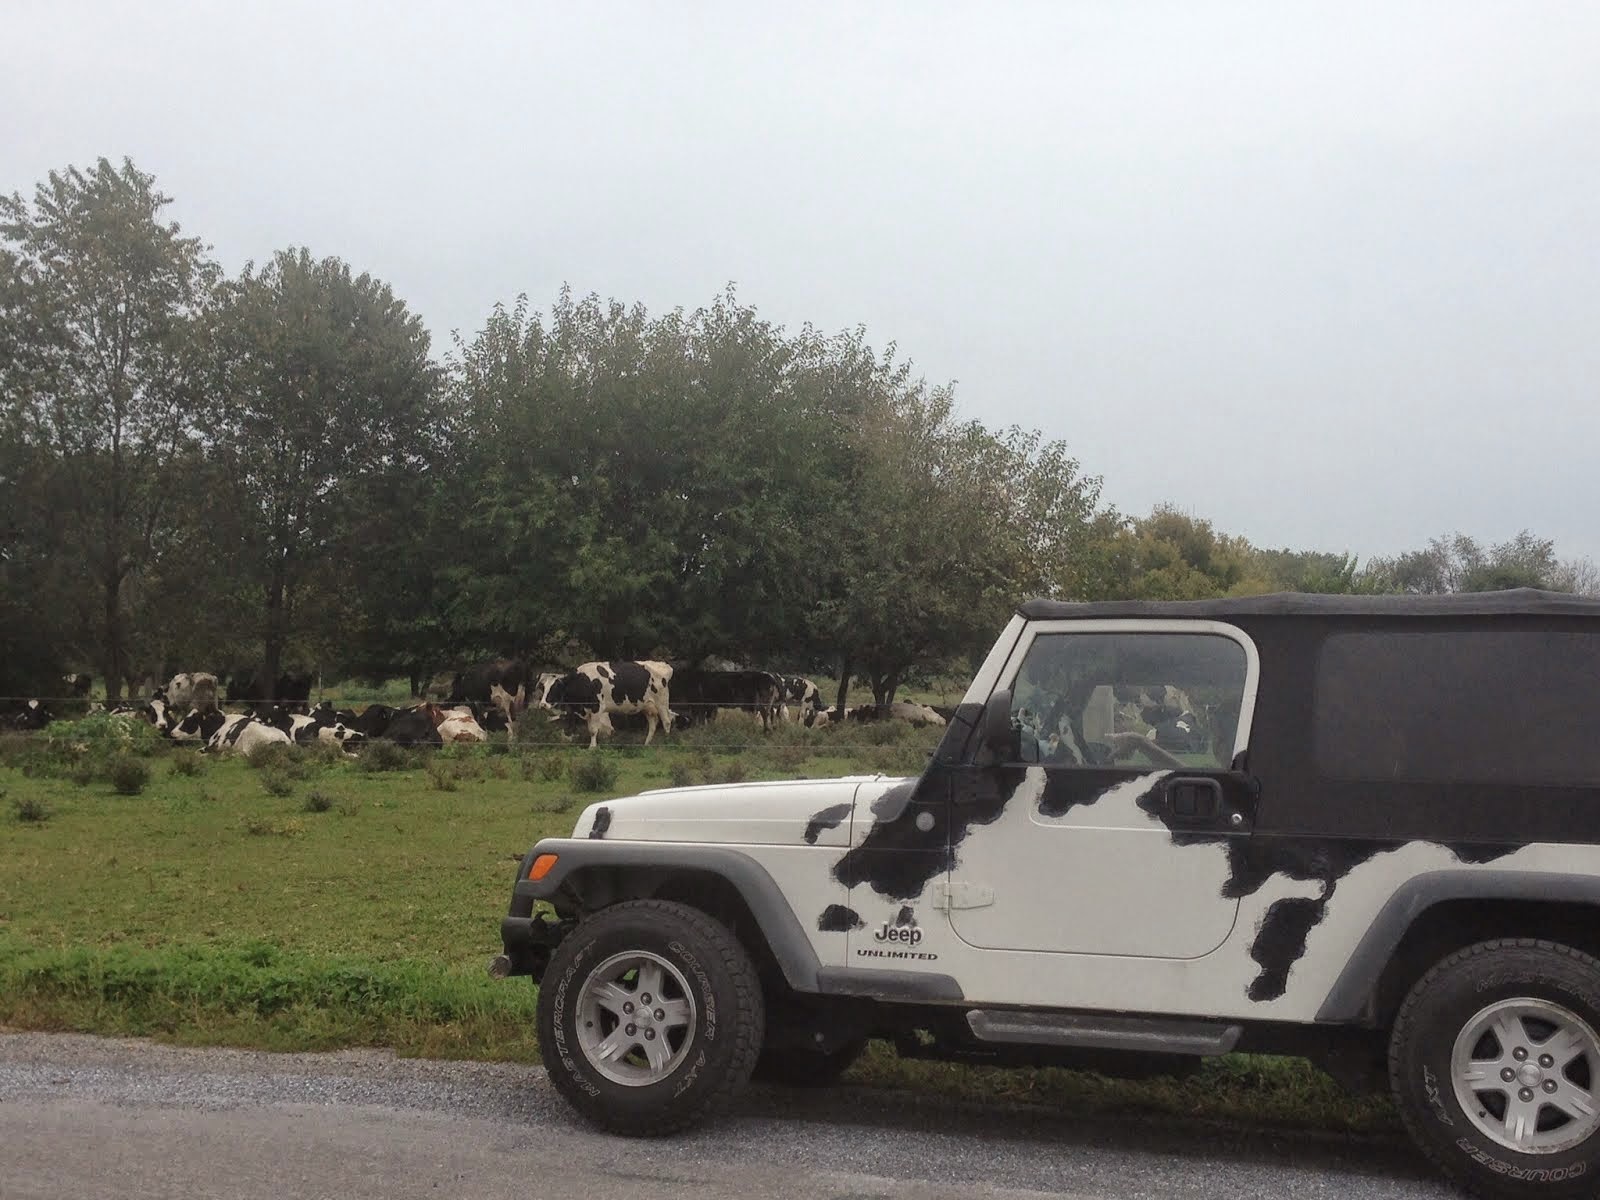 My jeep, Elsie, watches her fellow cows